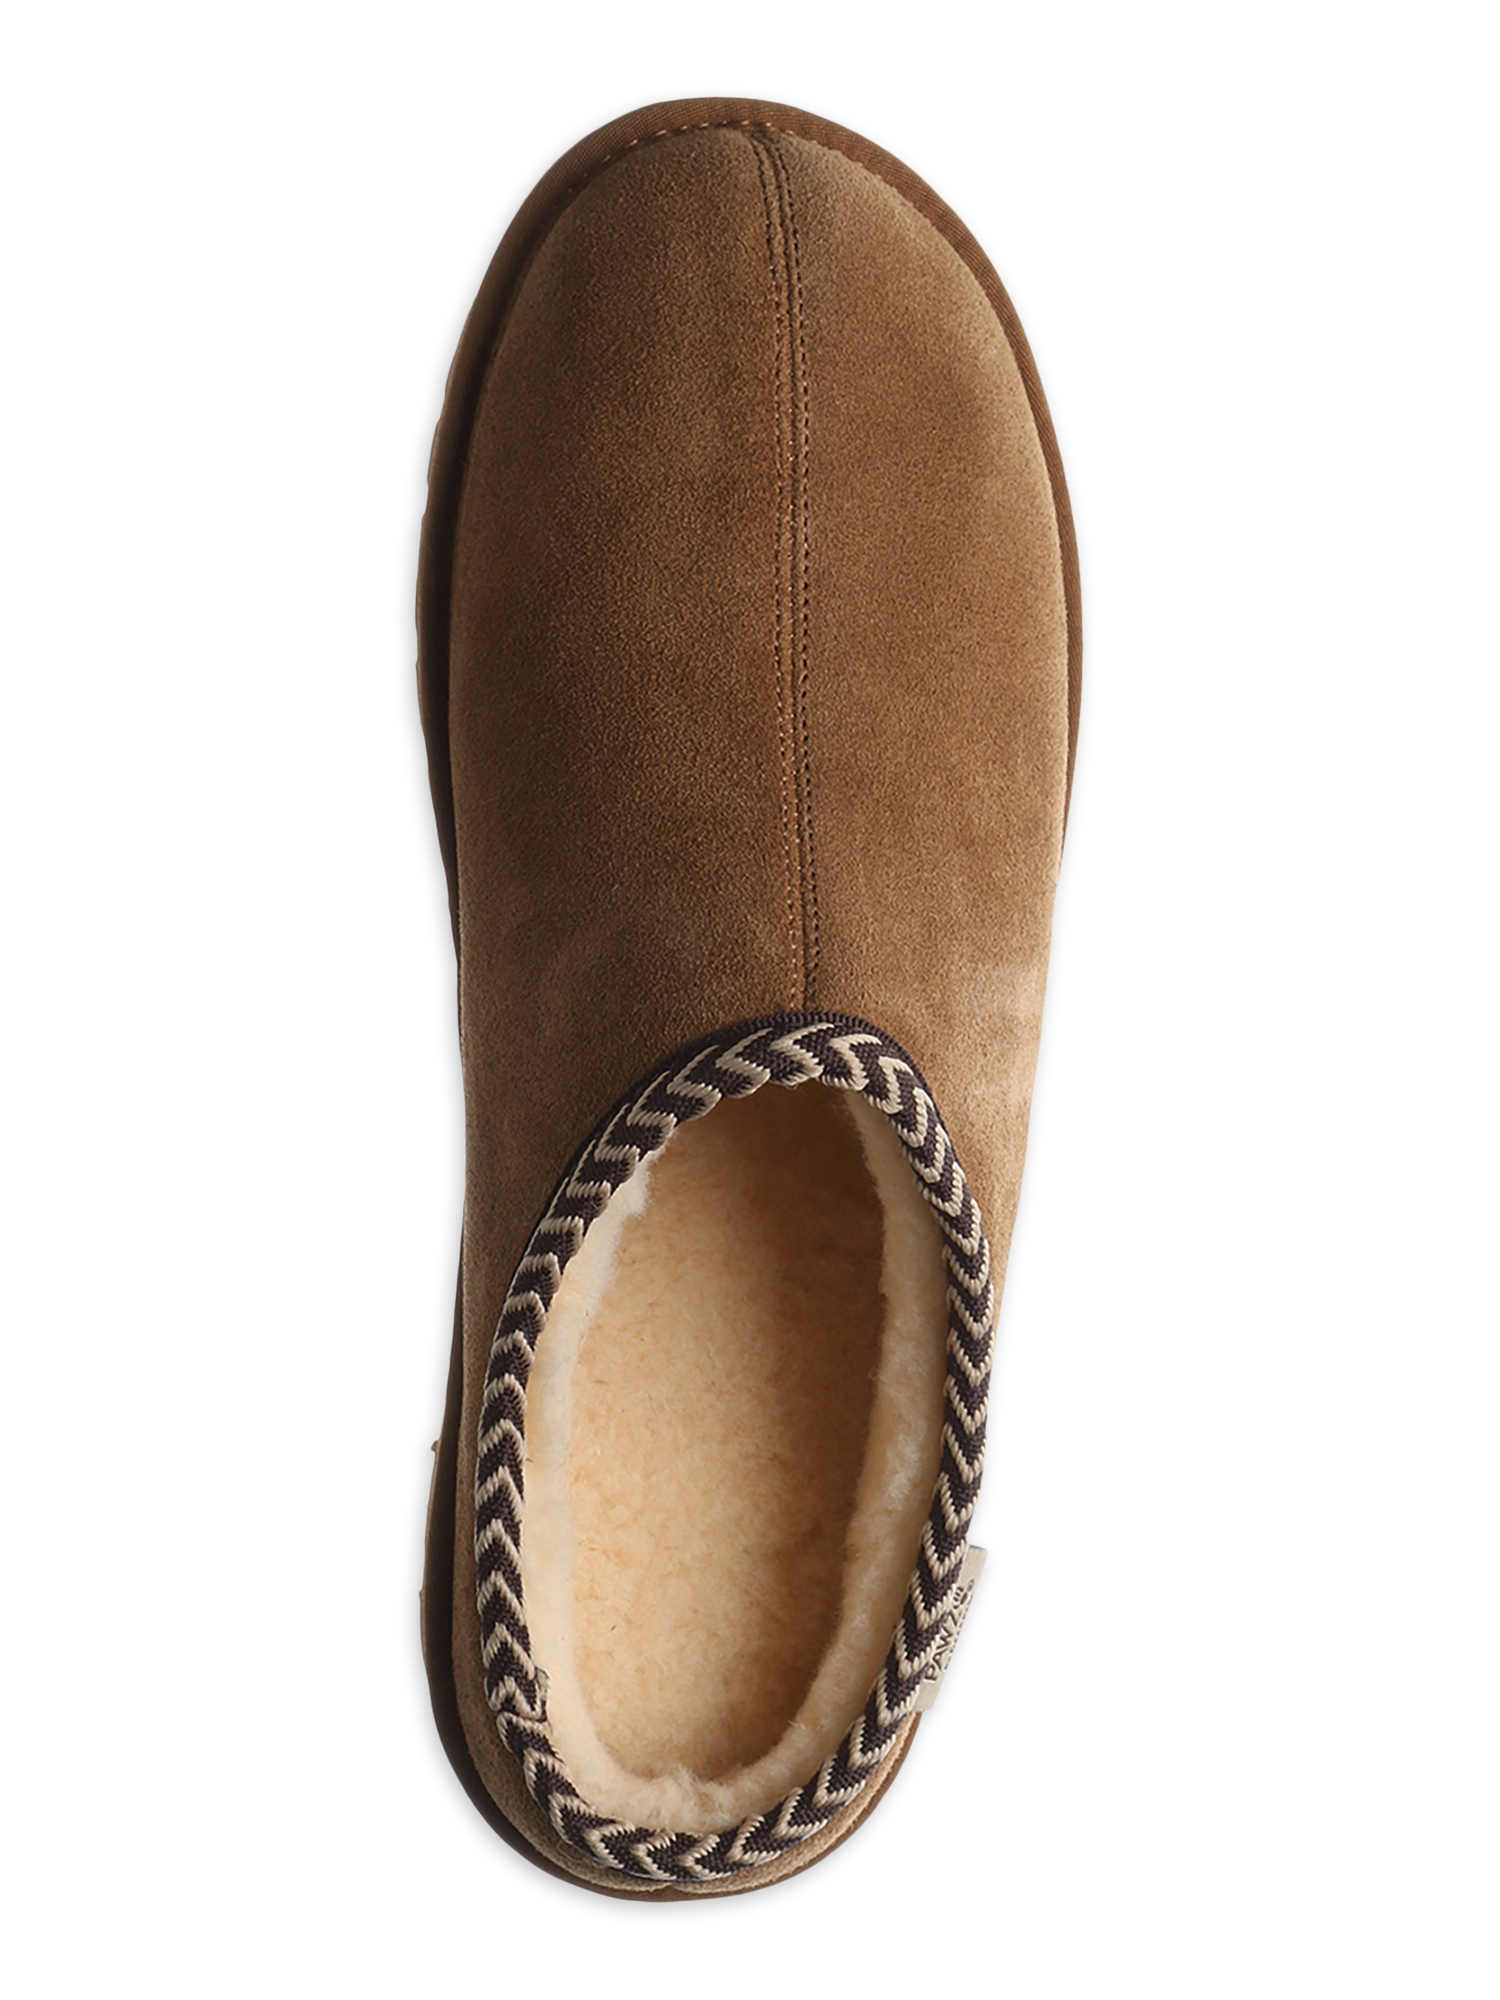 Pawz by Bearpaw Men's Genuine Suede Kevin Slipper Clogs - image 3 of 5